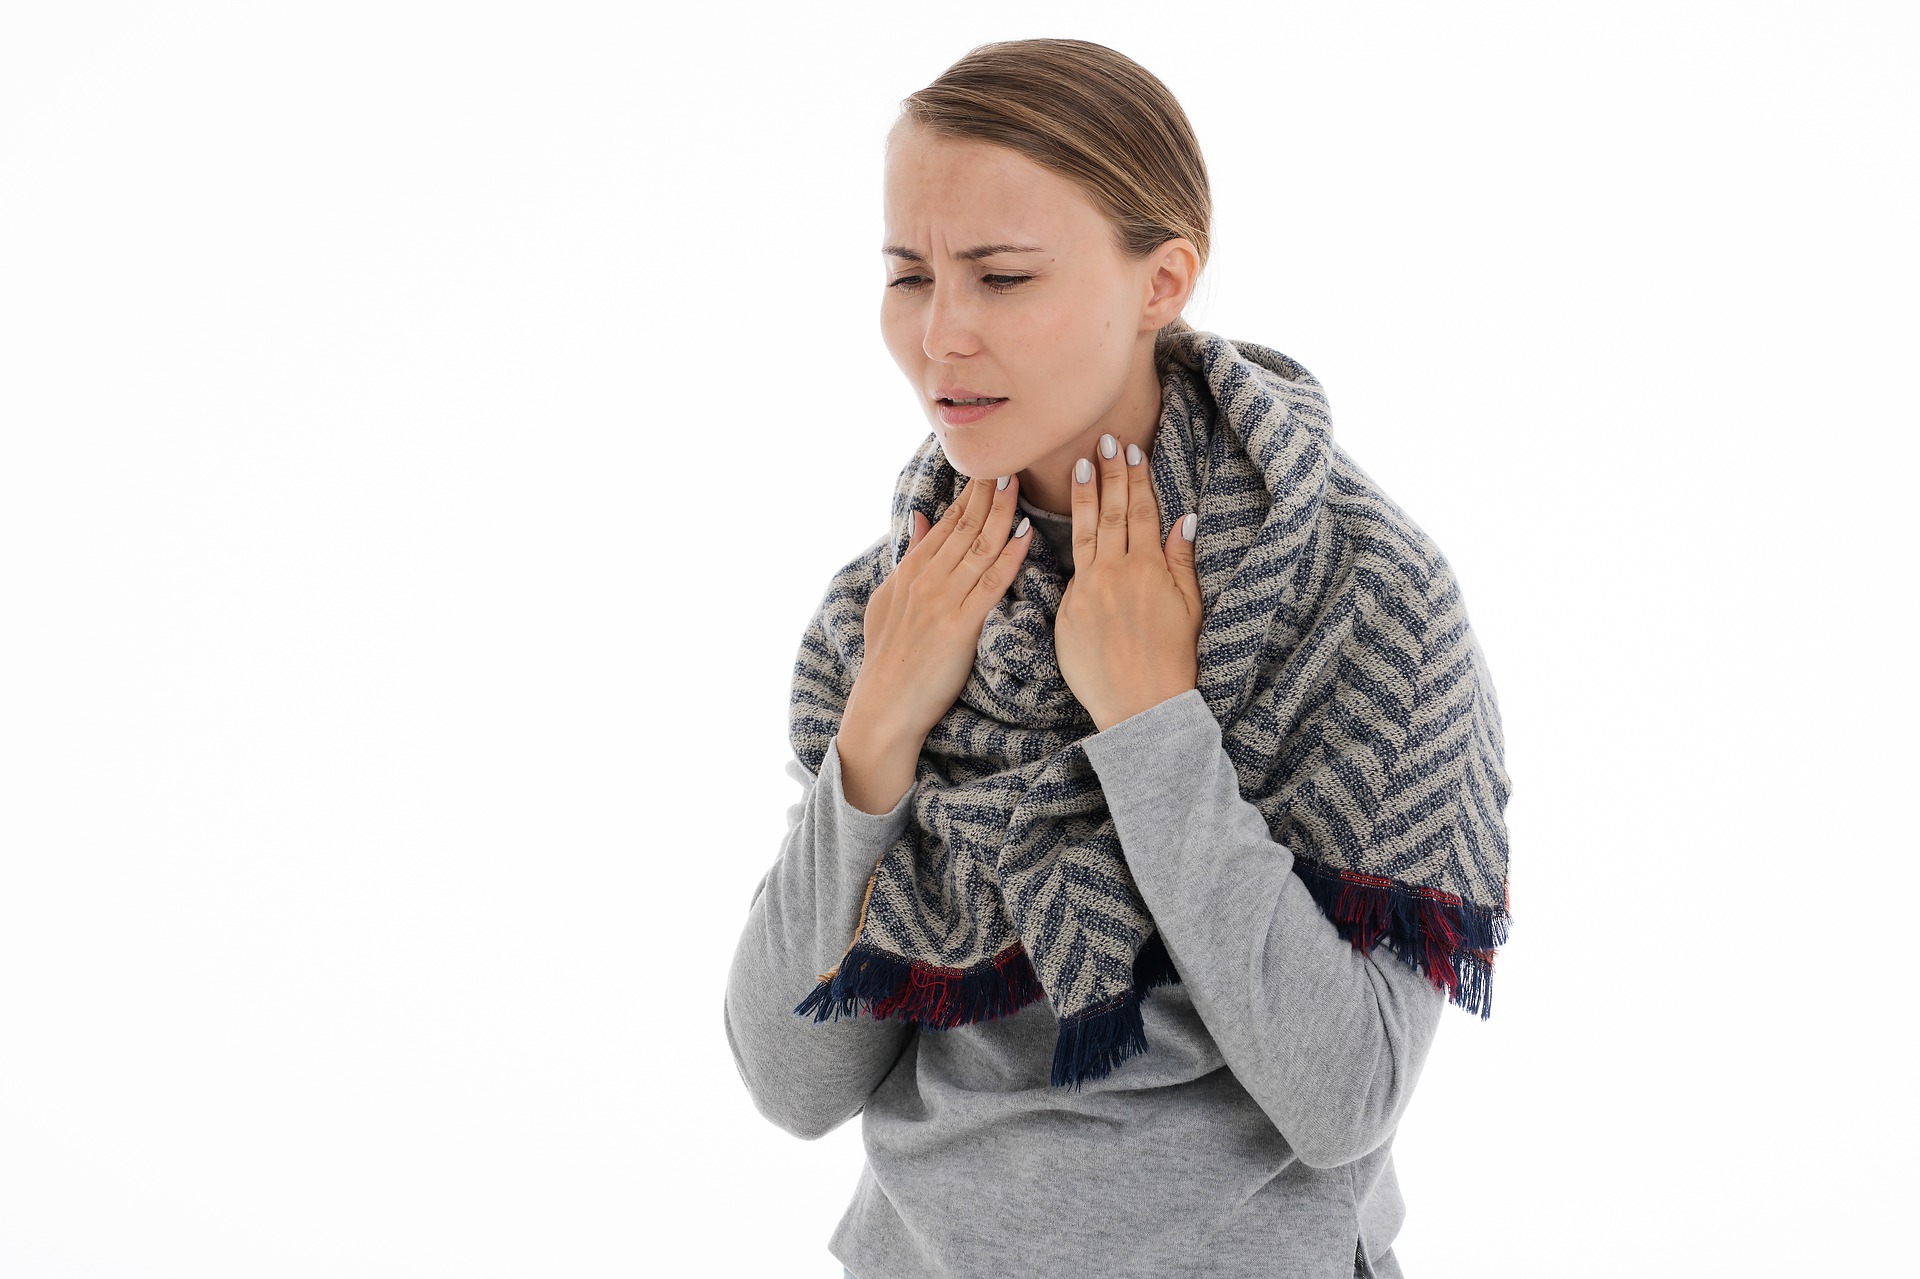 EFT Tapping for Thyroid